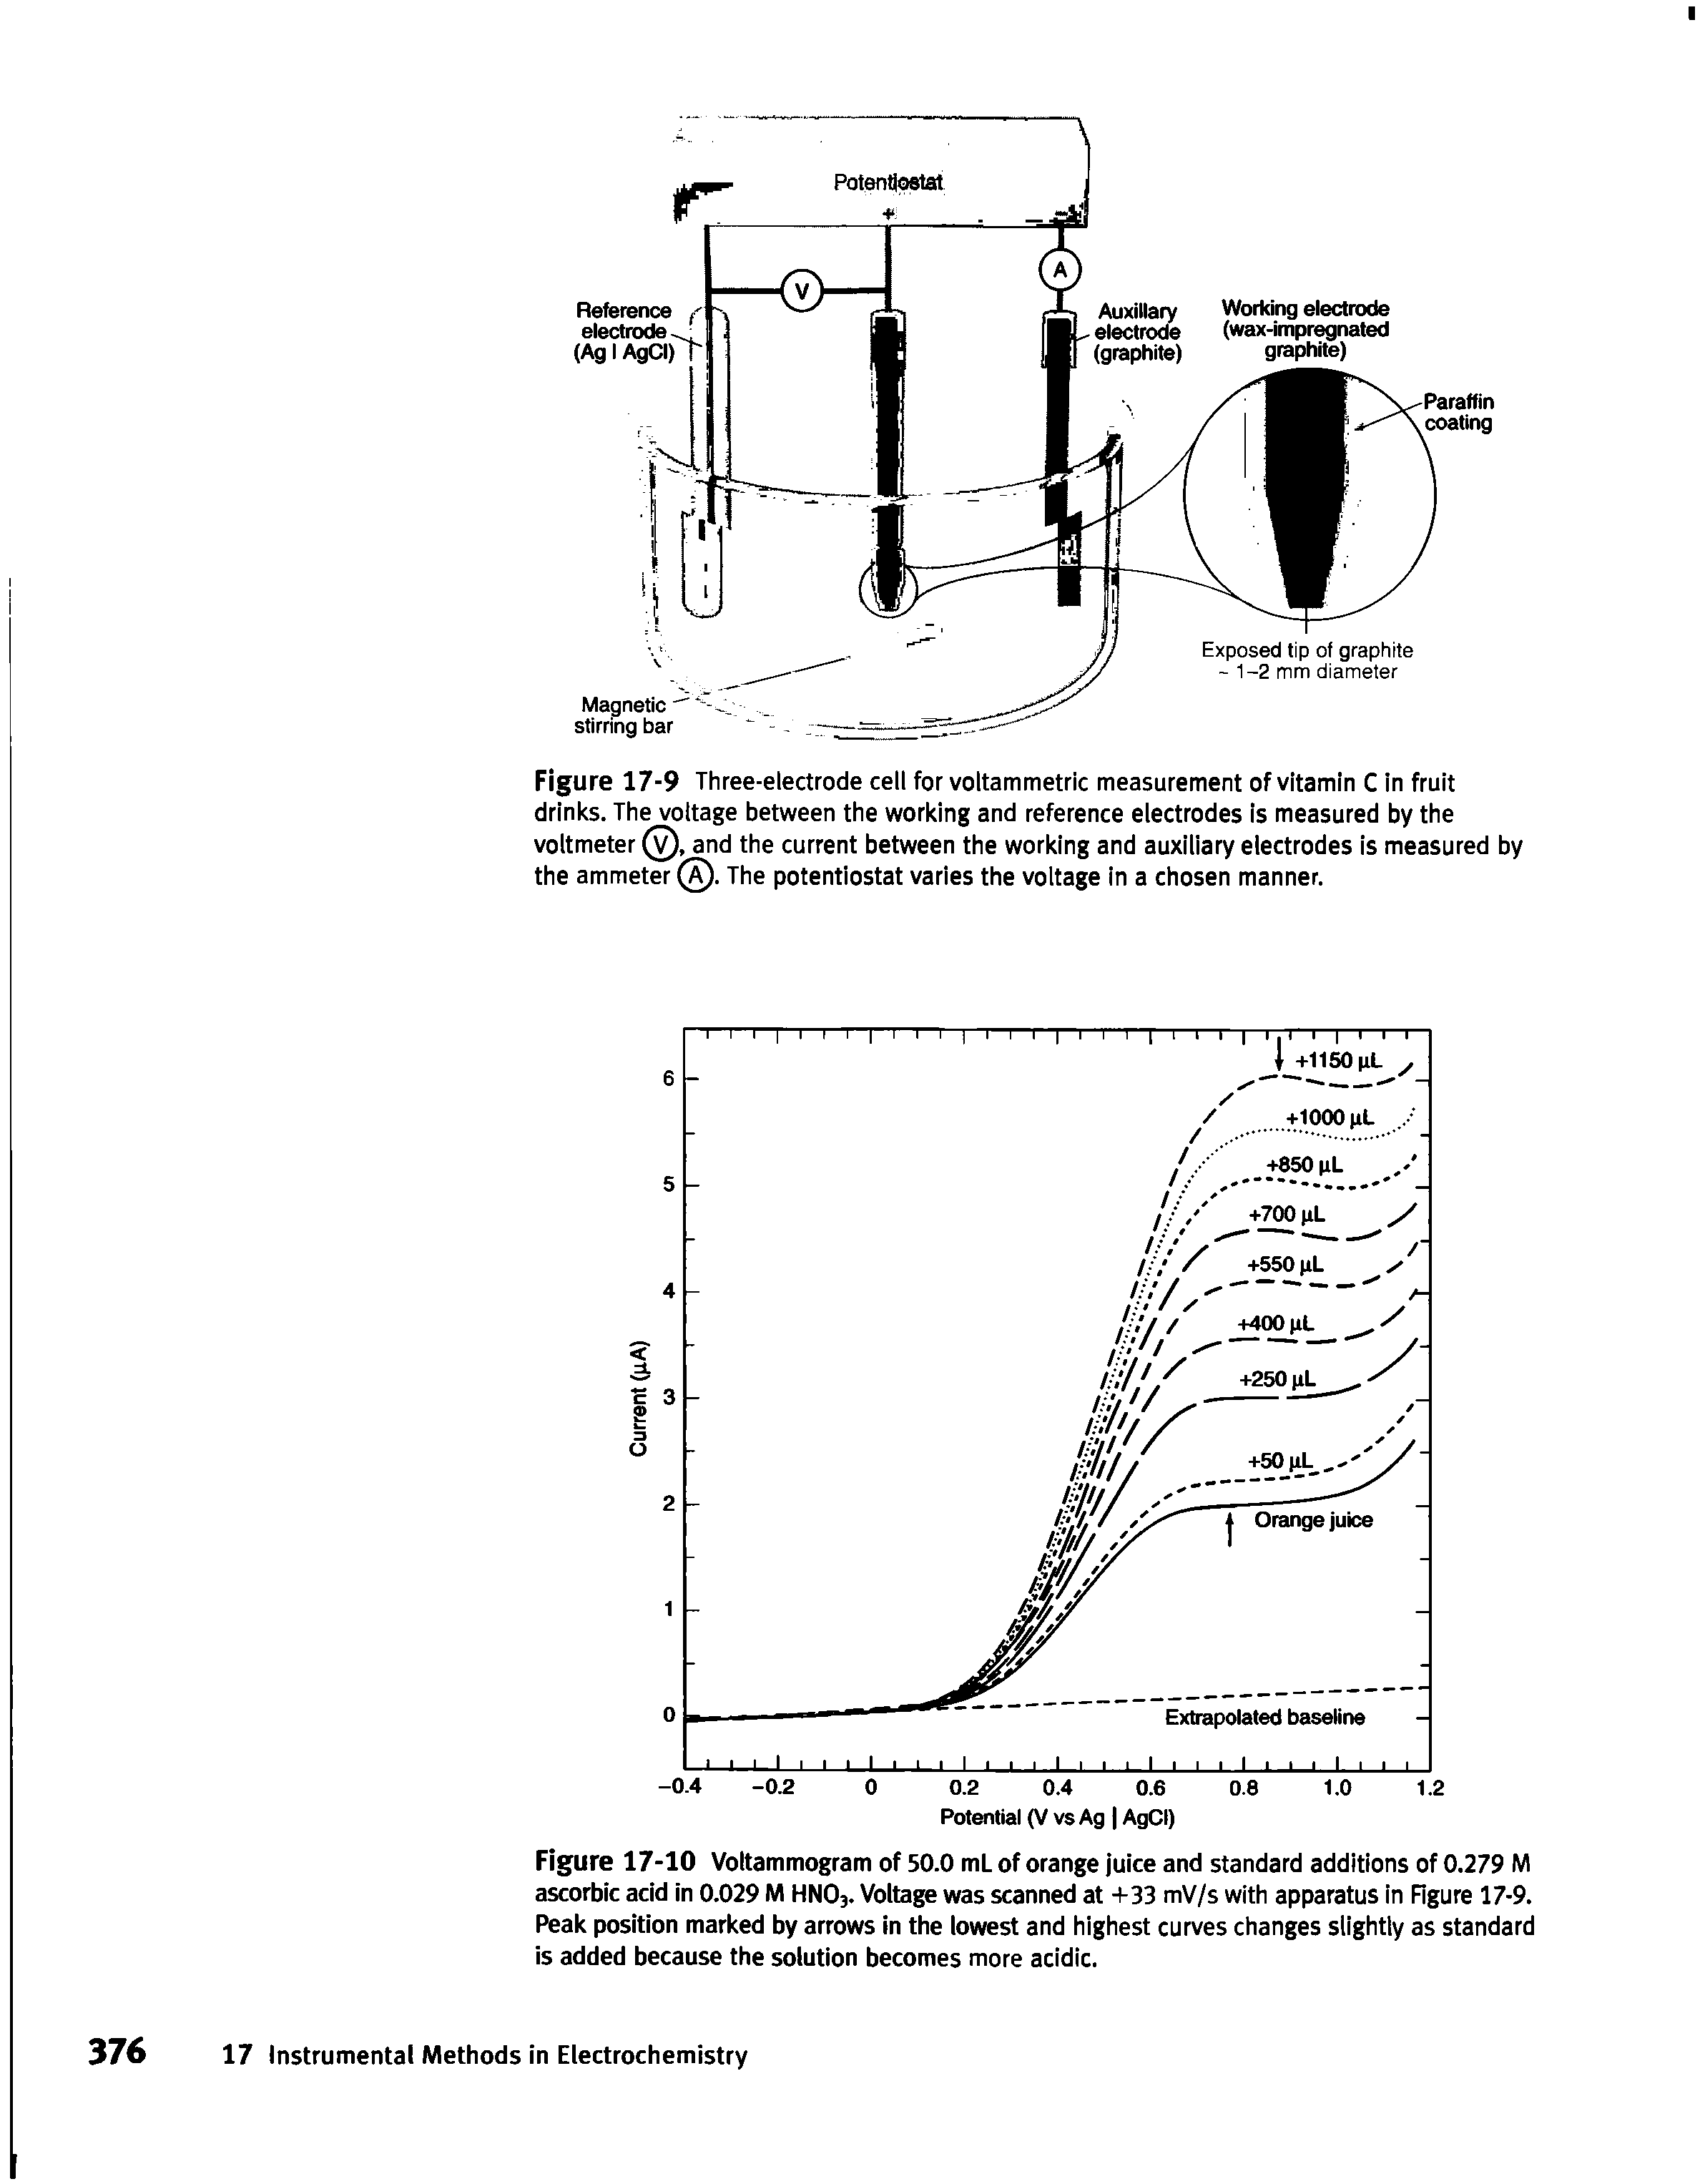 Figure 17-10 Voltammogram of 50.0 ml of orange juice and standard additions of 0.279 M ascorbic acid in 0.029 M HNOb. Voltage was scanned at -t-33 mV/s with apparatus in Rgure 17-9. Peak position marked by arrows in the iowest and highest curves changes slightly as standard is added because the solution becomes more acidic.